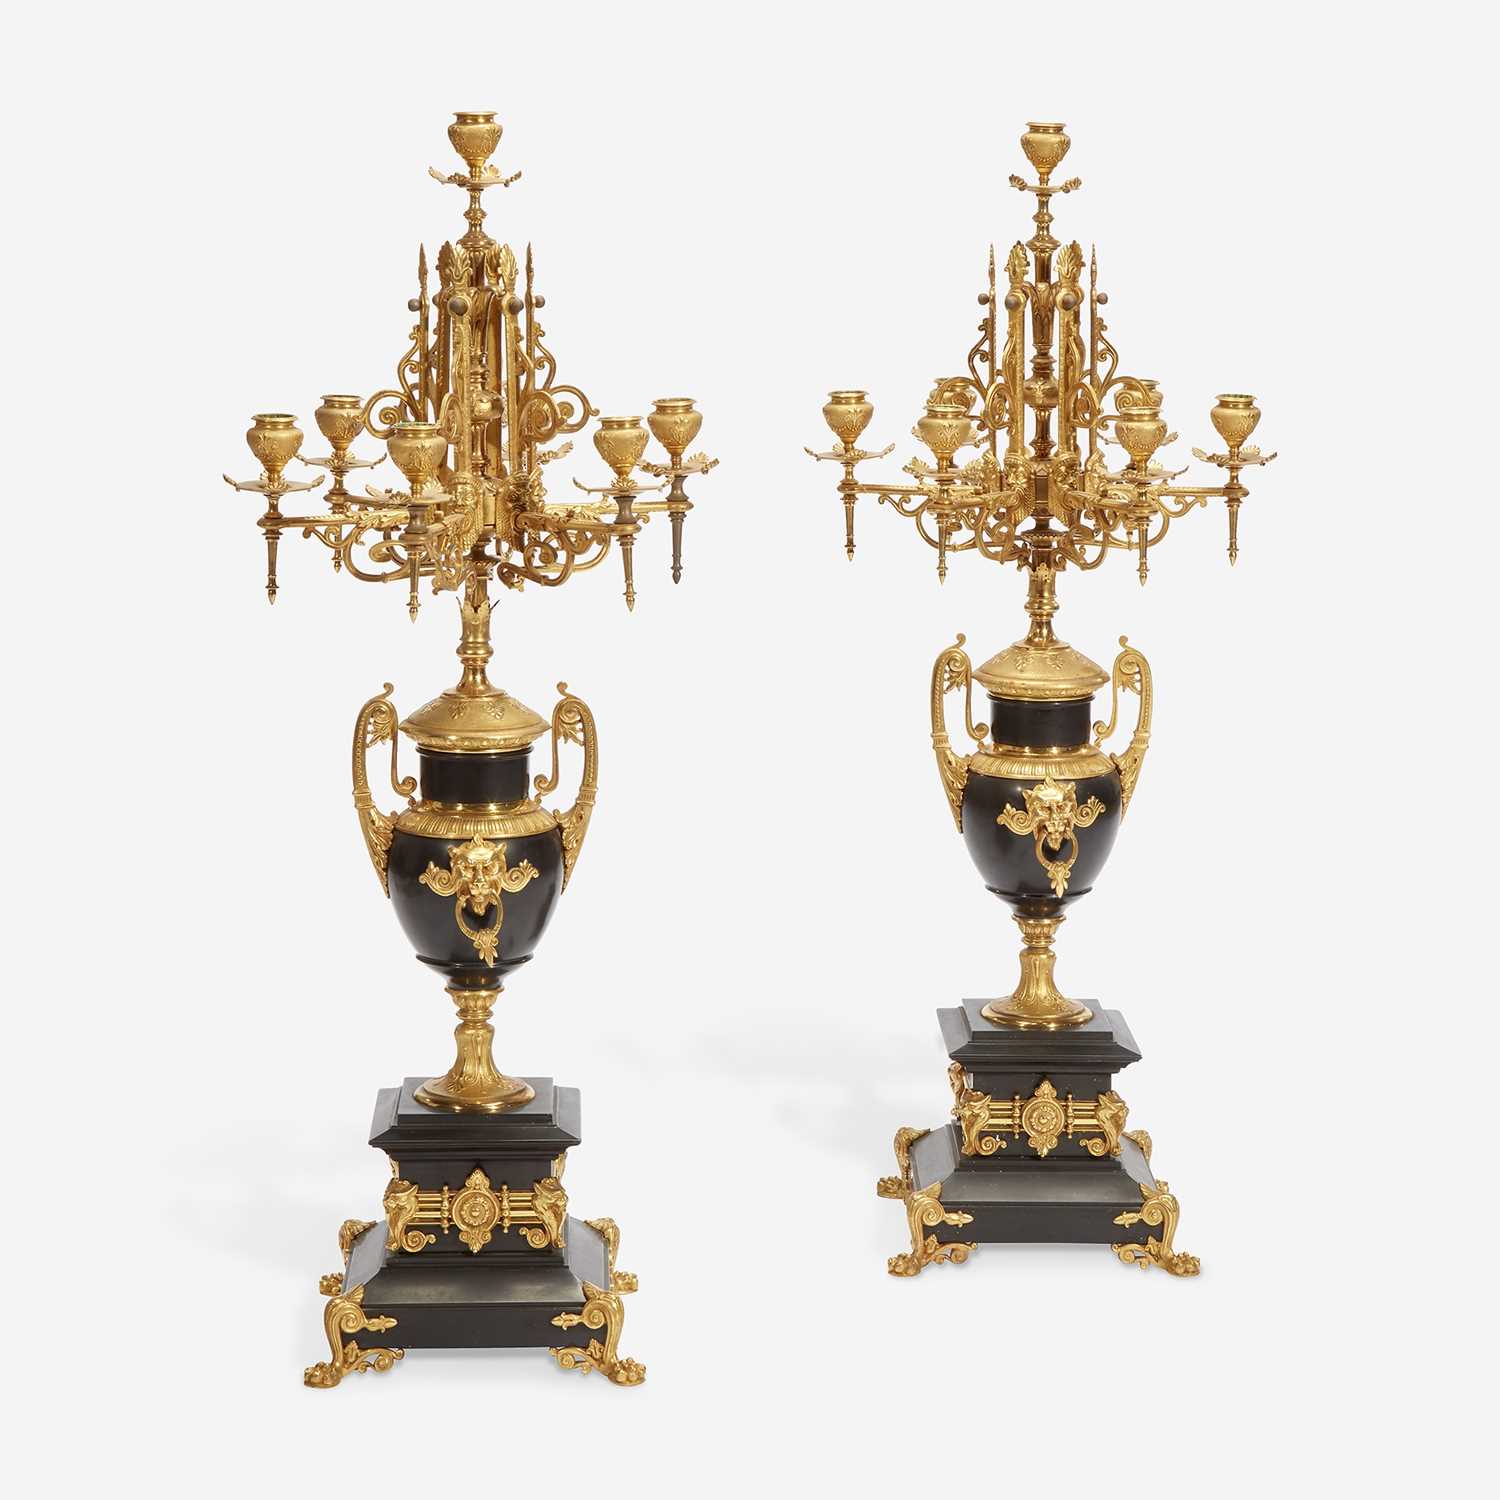 Lot 37 - A Pair of Napoleon III Gilt-Bronze and Black Marble Seven-Light Candelabra